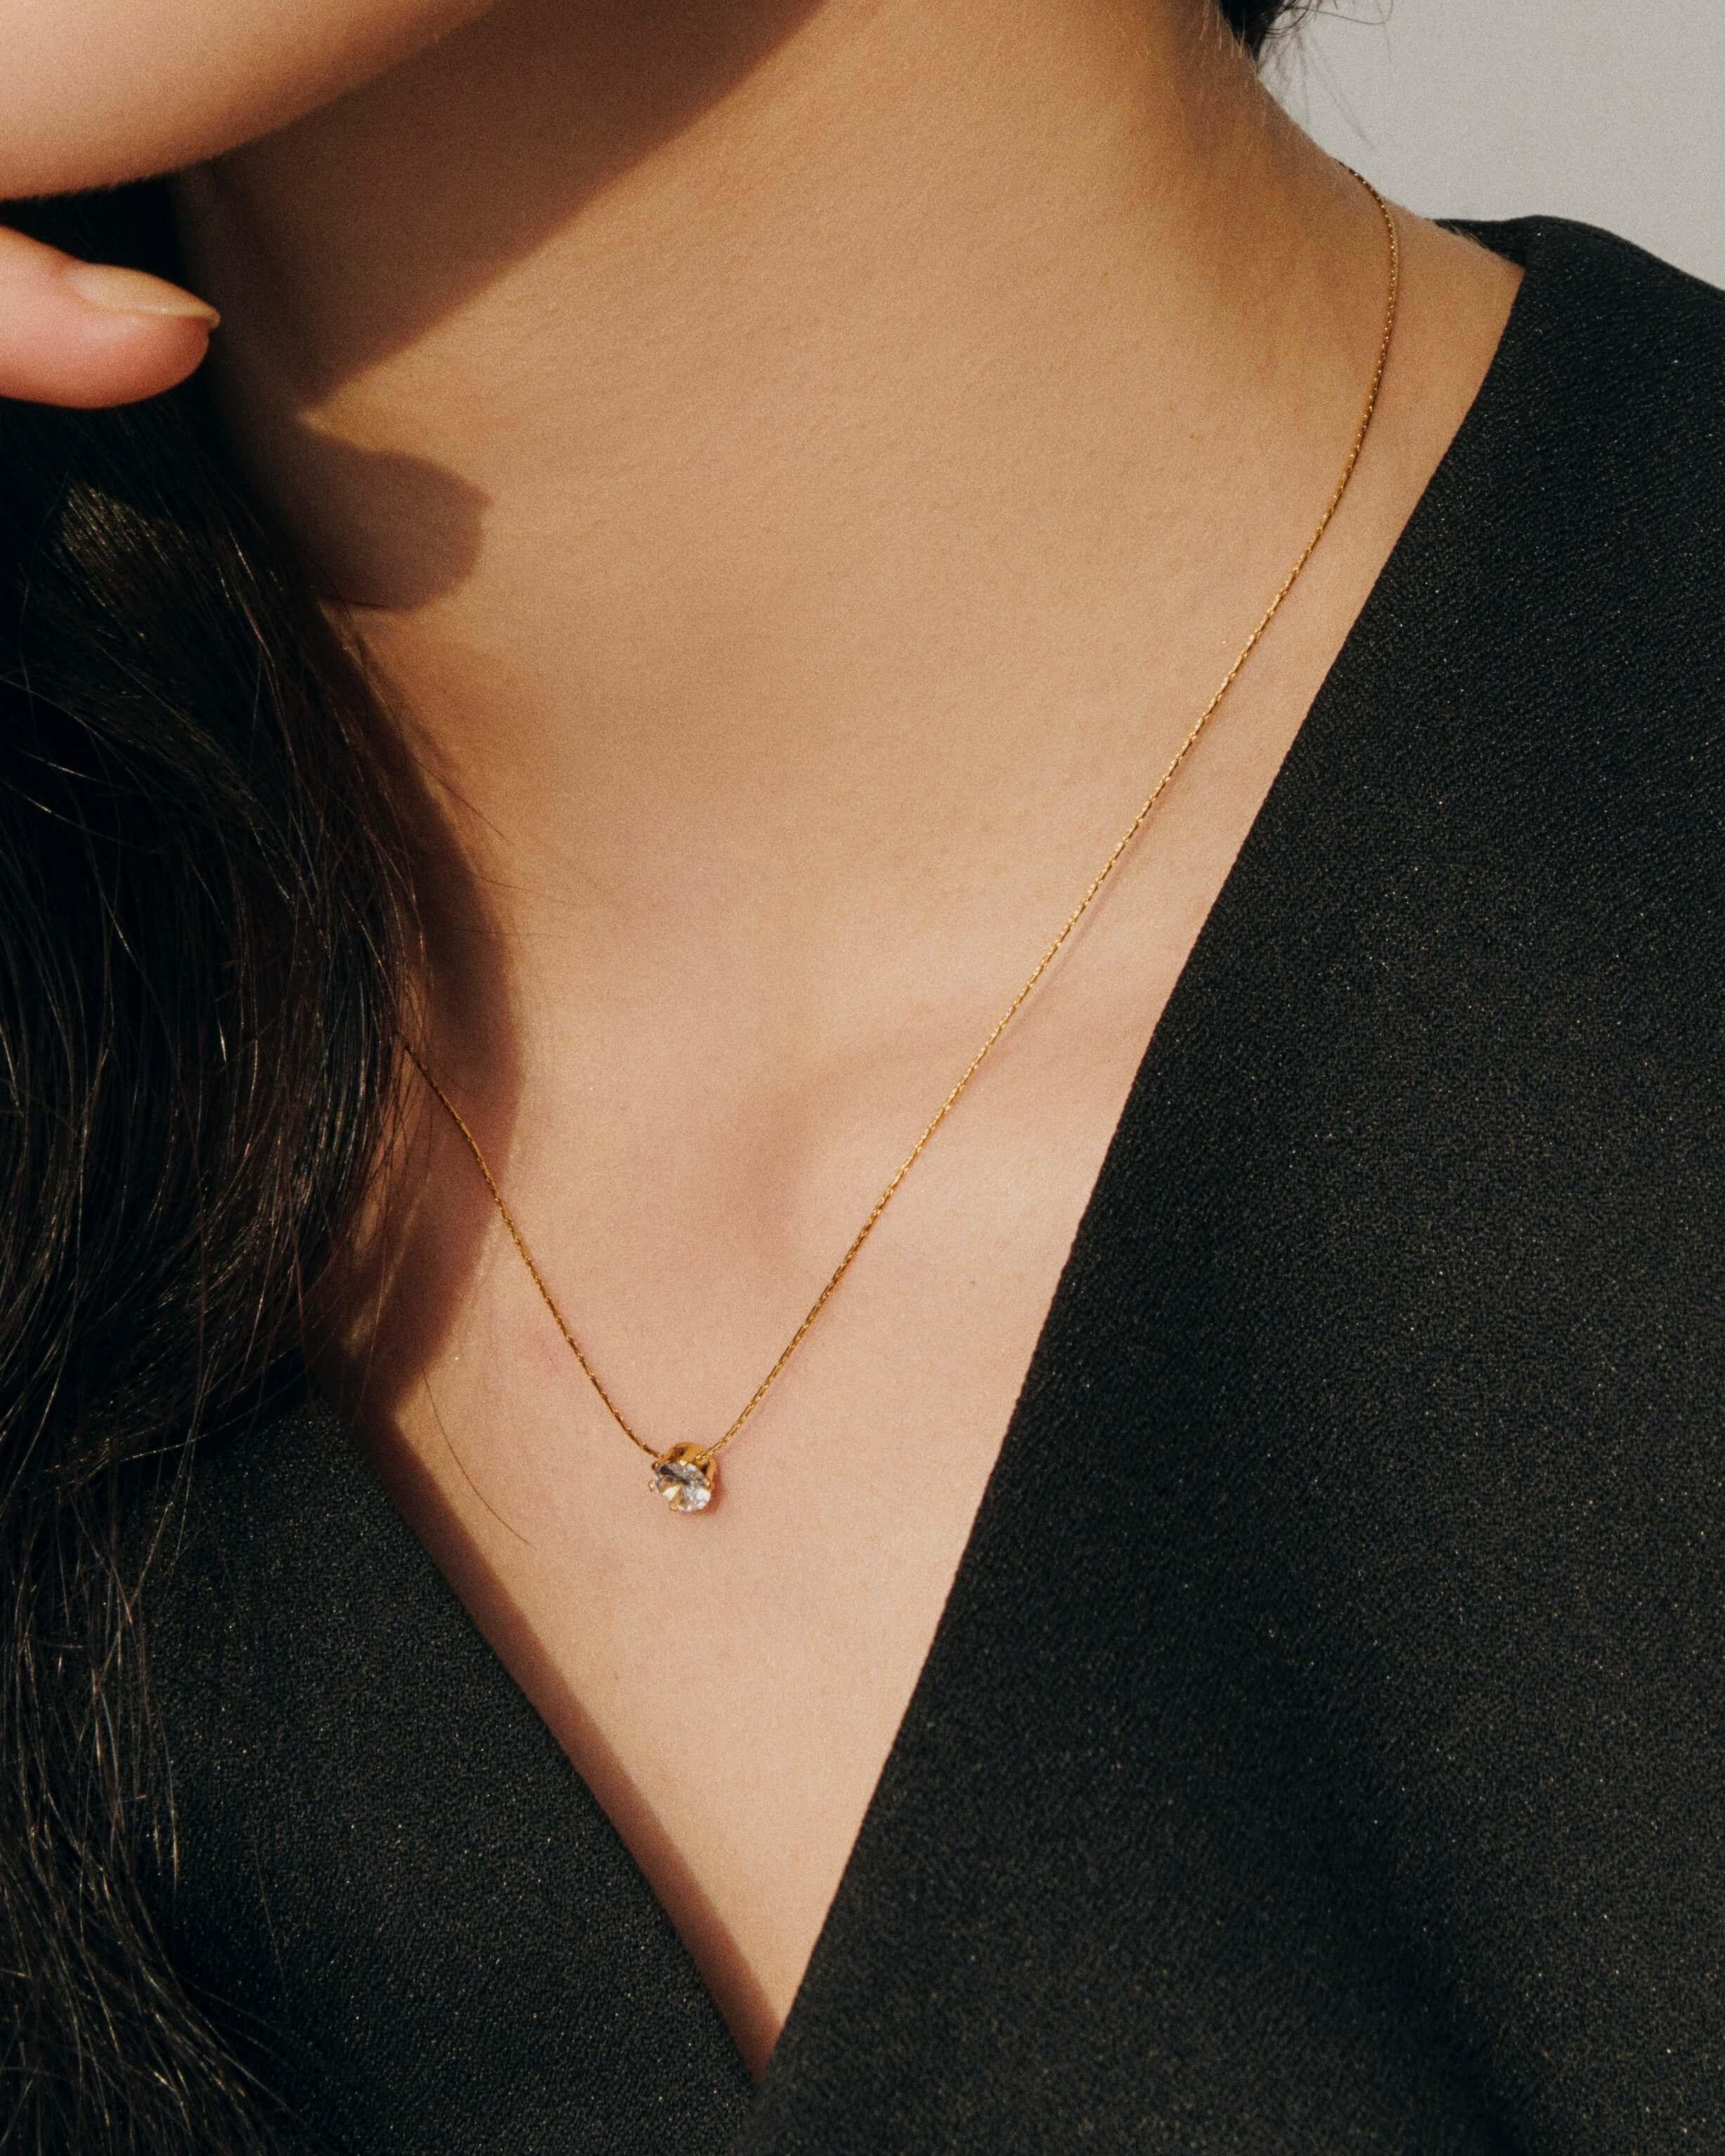 NORTH STAR CHARM NECKLACE - LIMELY